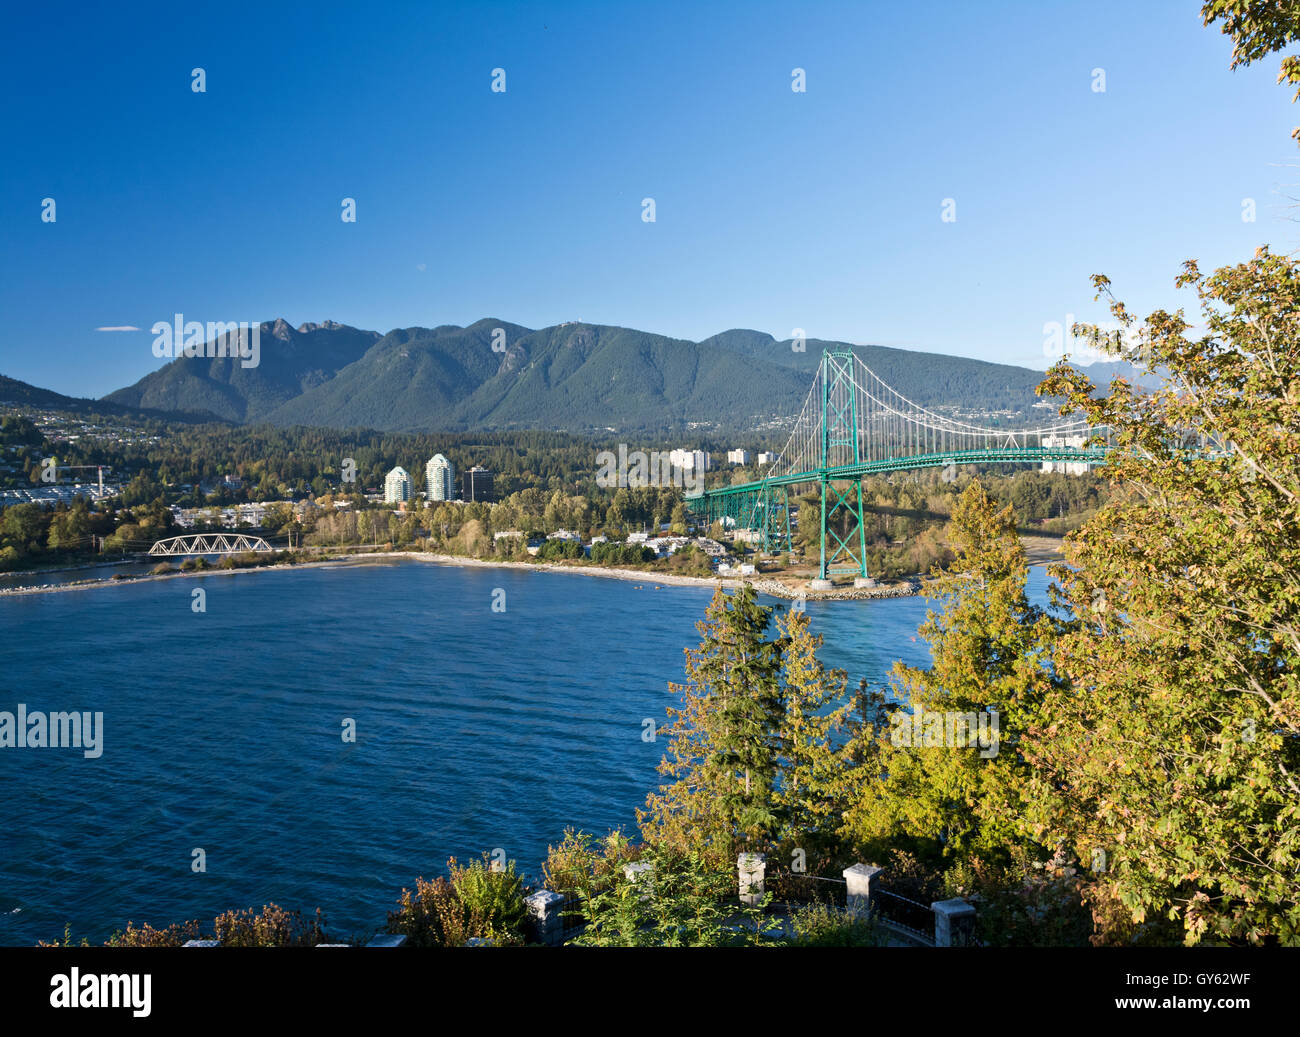 View of Lions Gate Bridge and North Vancouver, Grouse Mountain, Burrard Inlet, from Prospect Point in Stanley Park. Waters of Burrard Inlet. Stock Photo